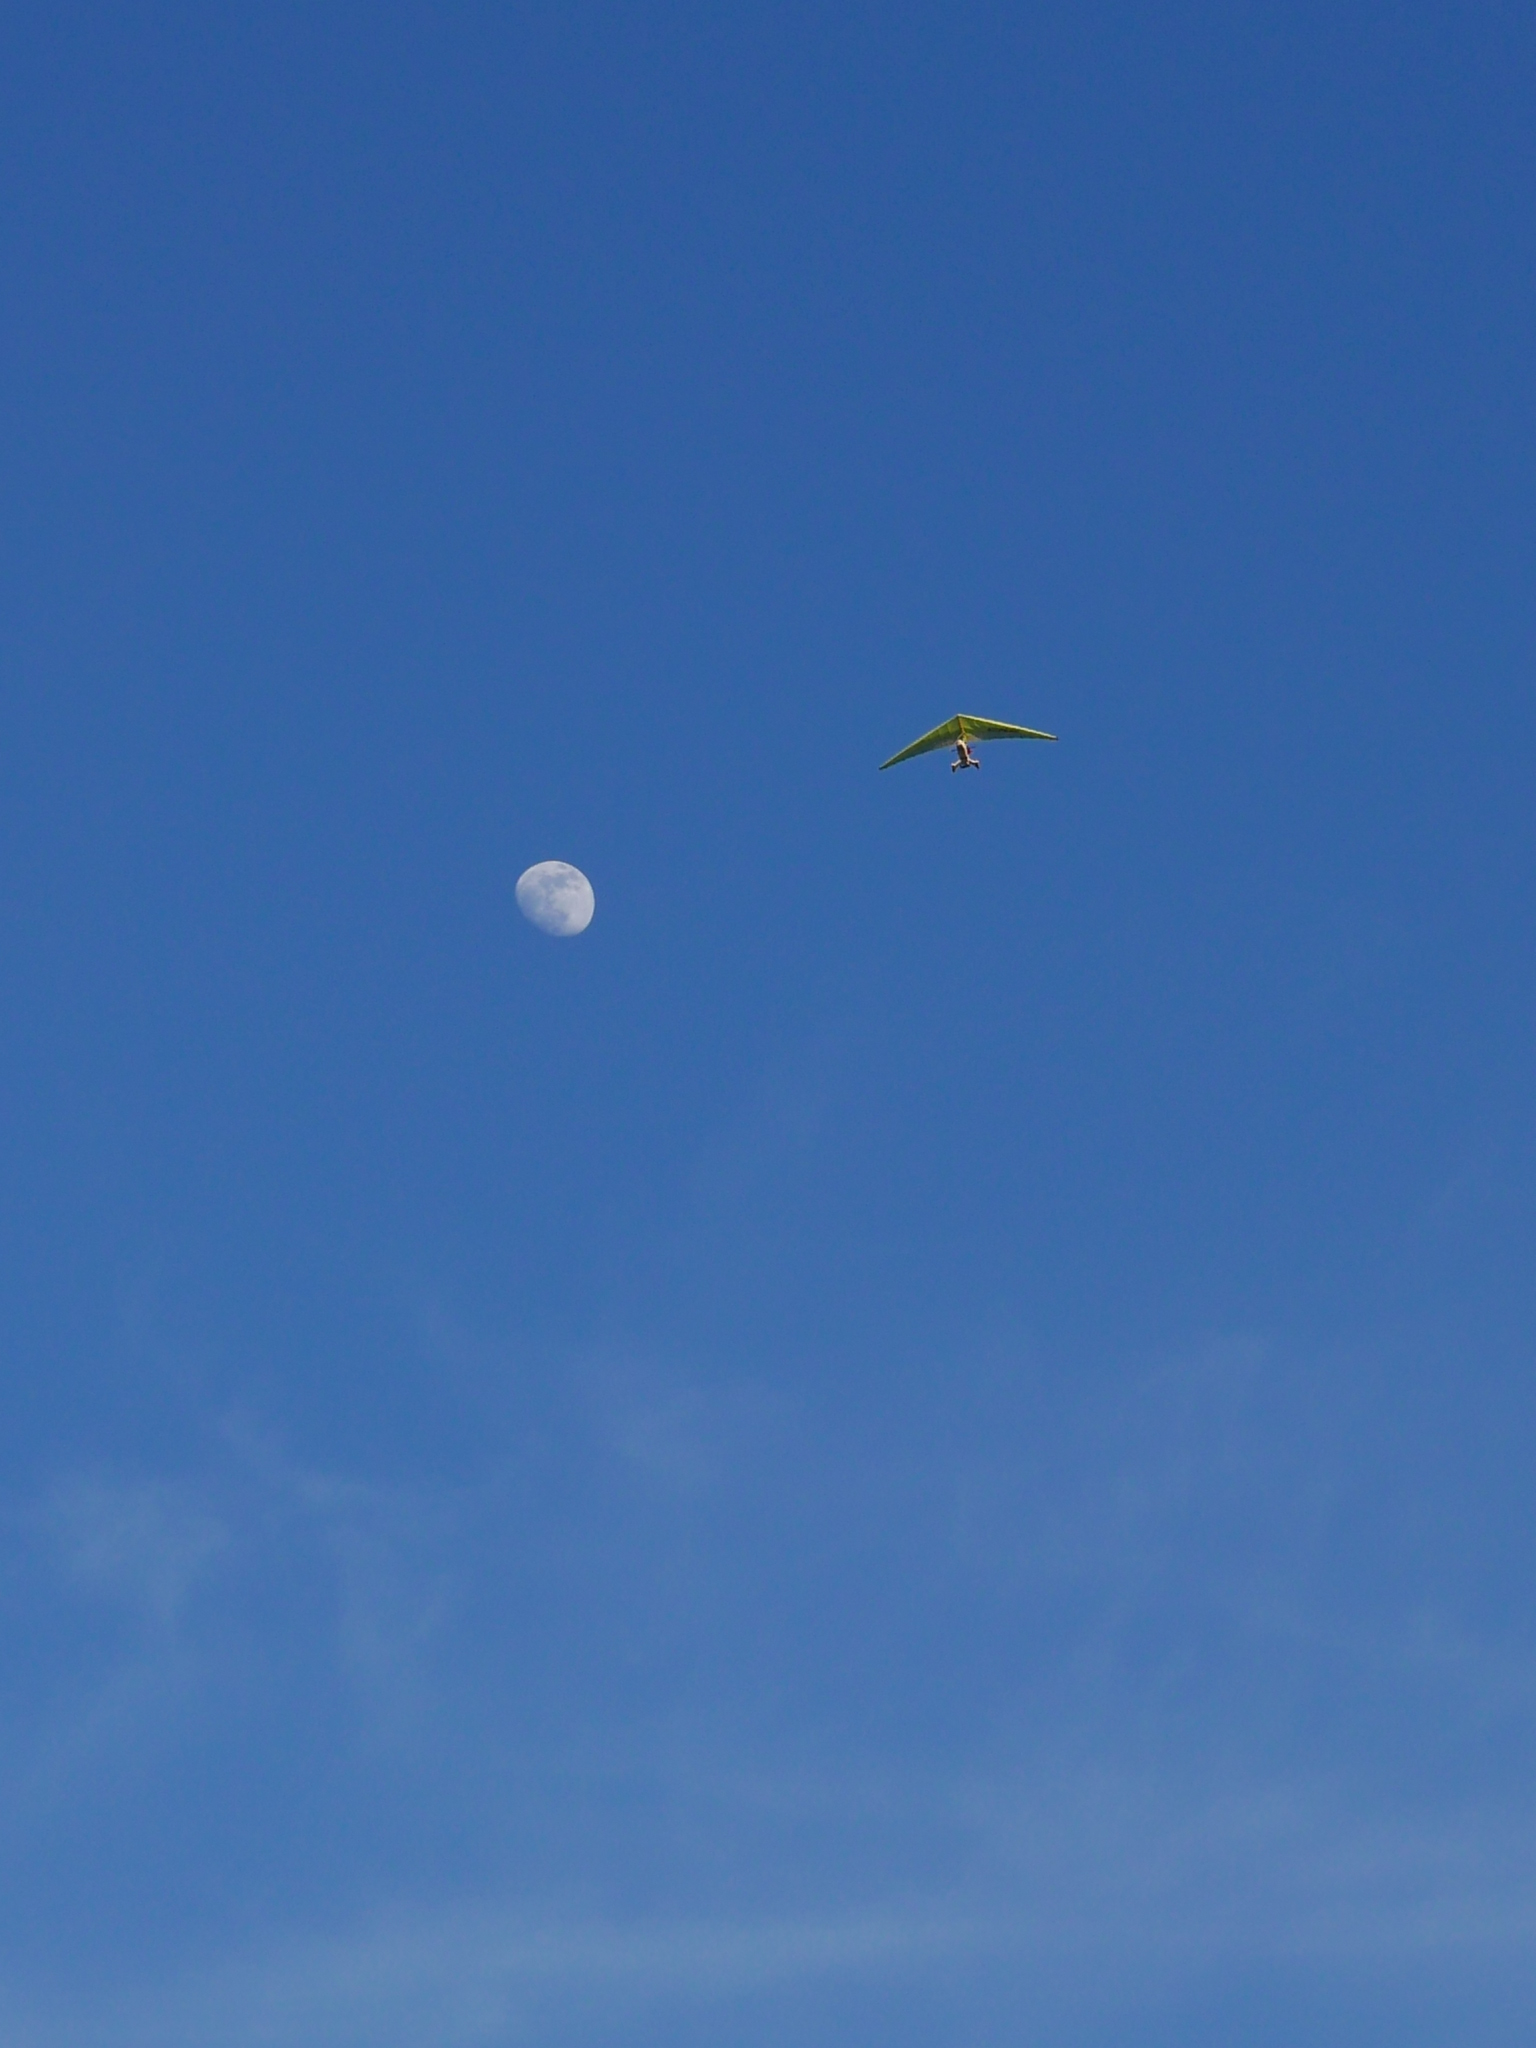 The hang glider and the moon...